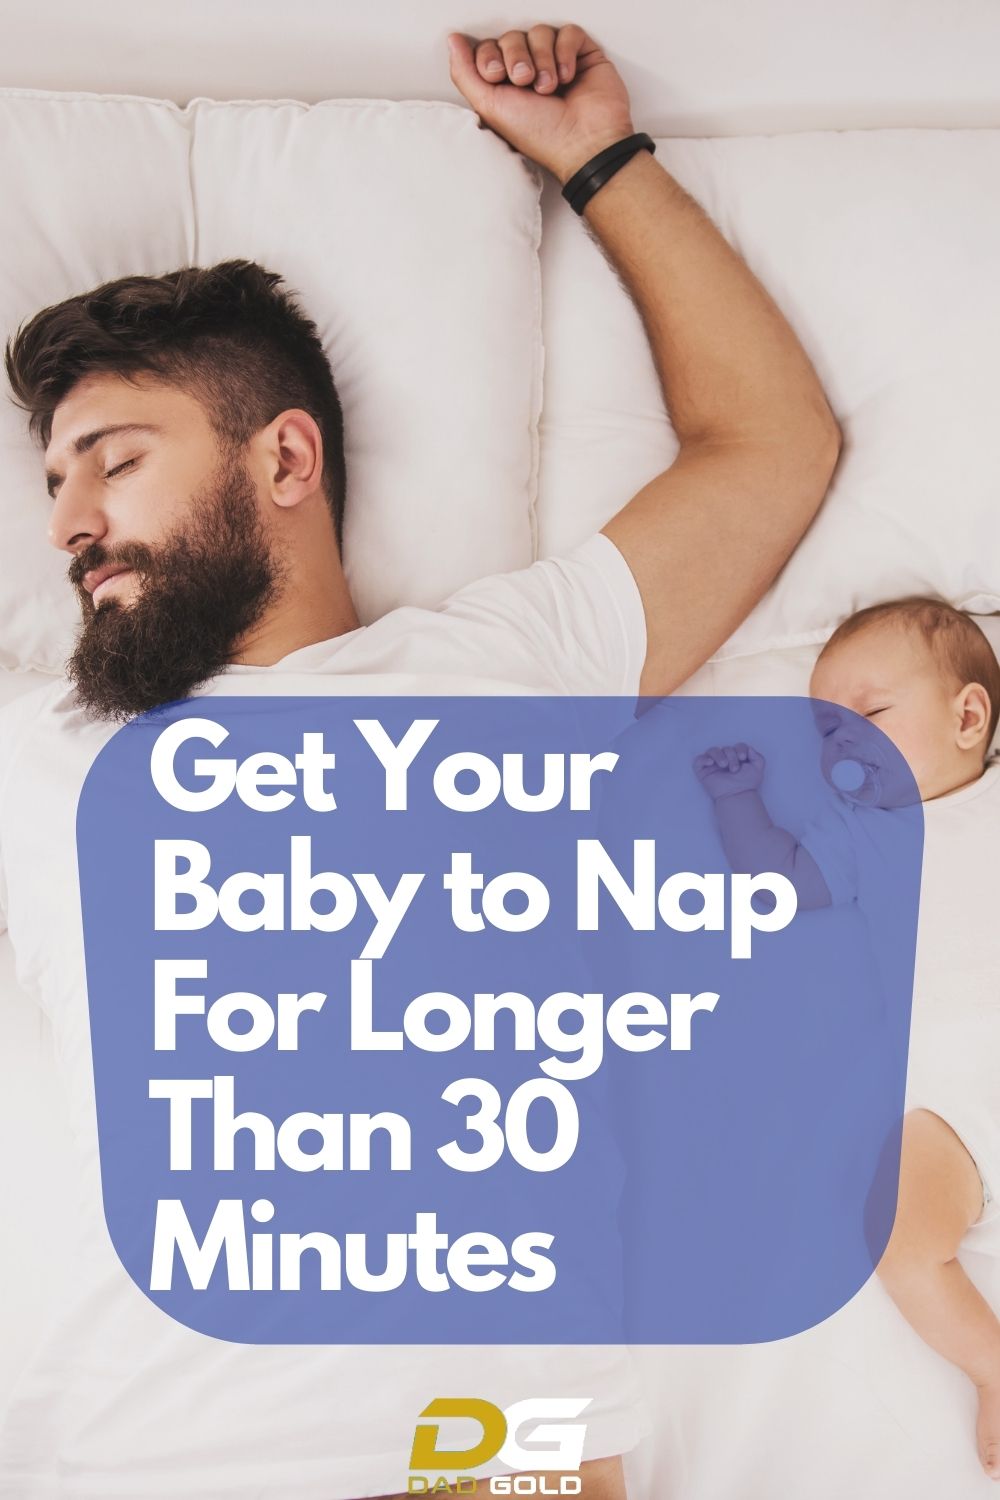 Get Your Baby to Nap For Longer Than 30 Minutes